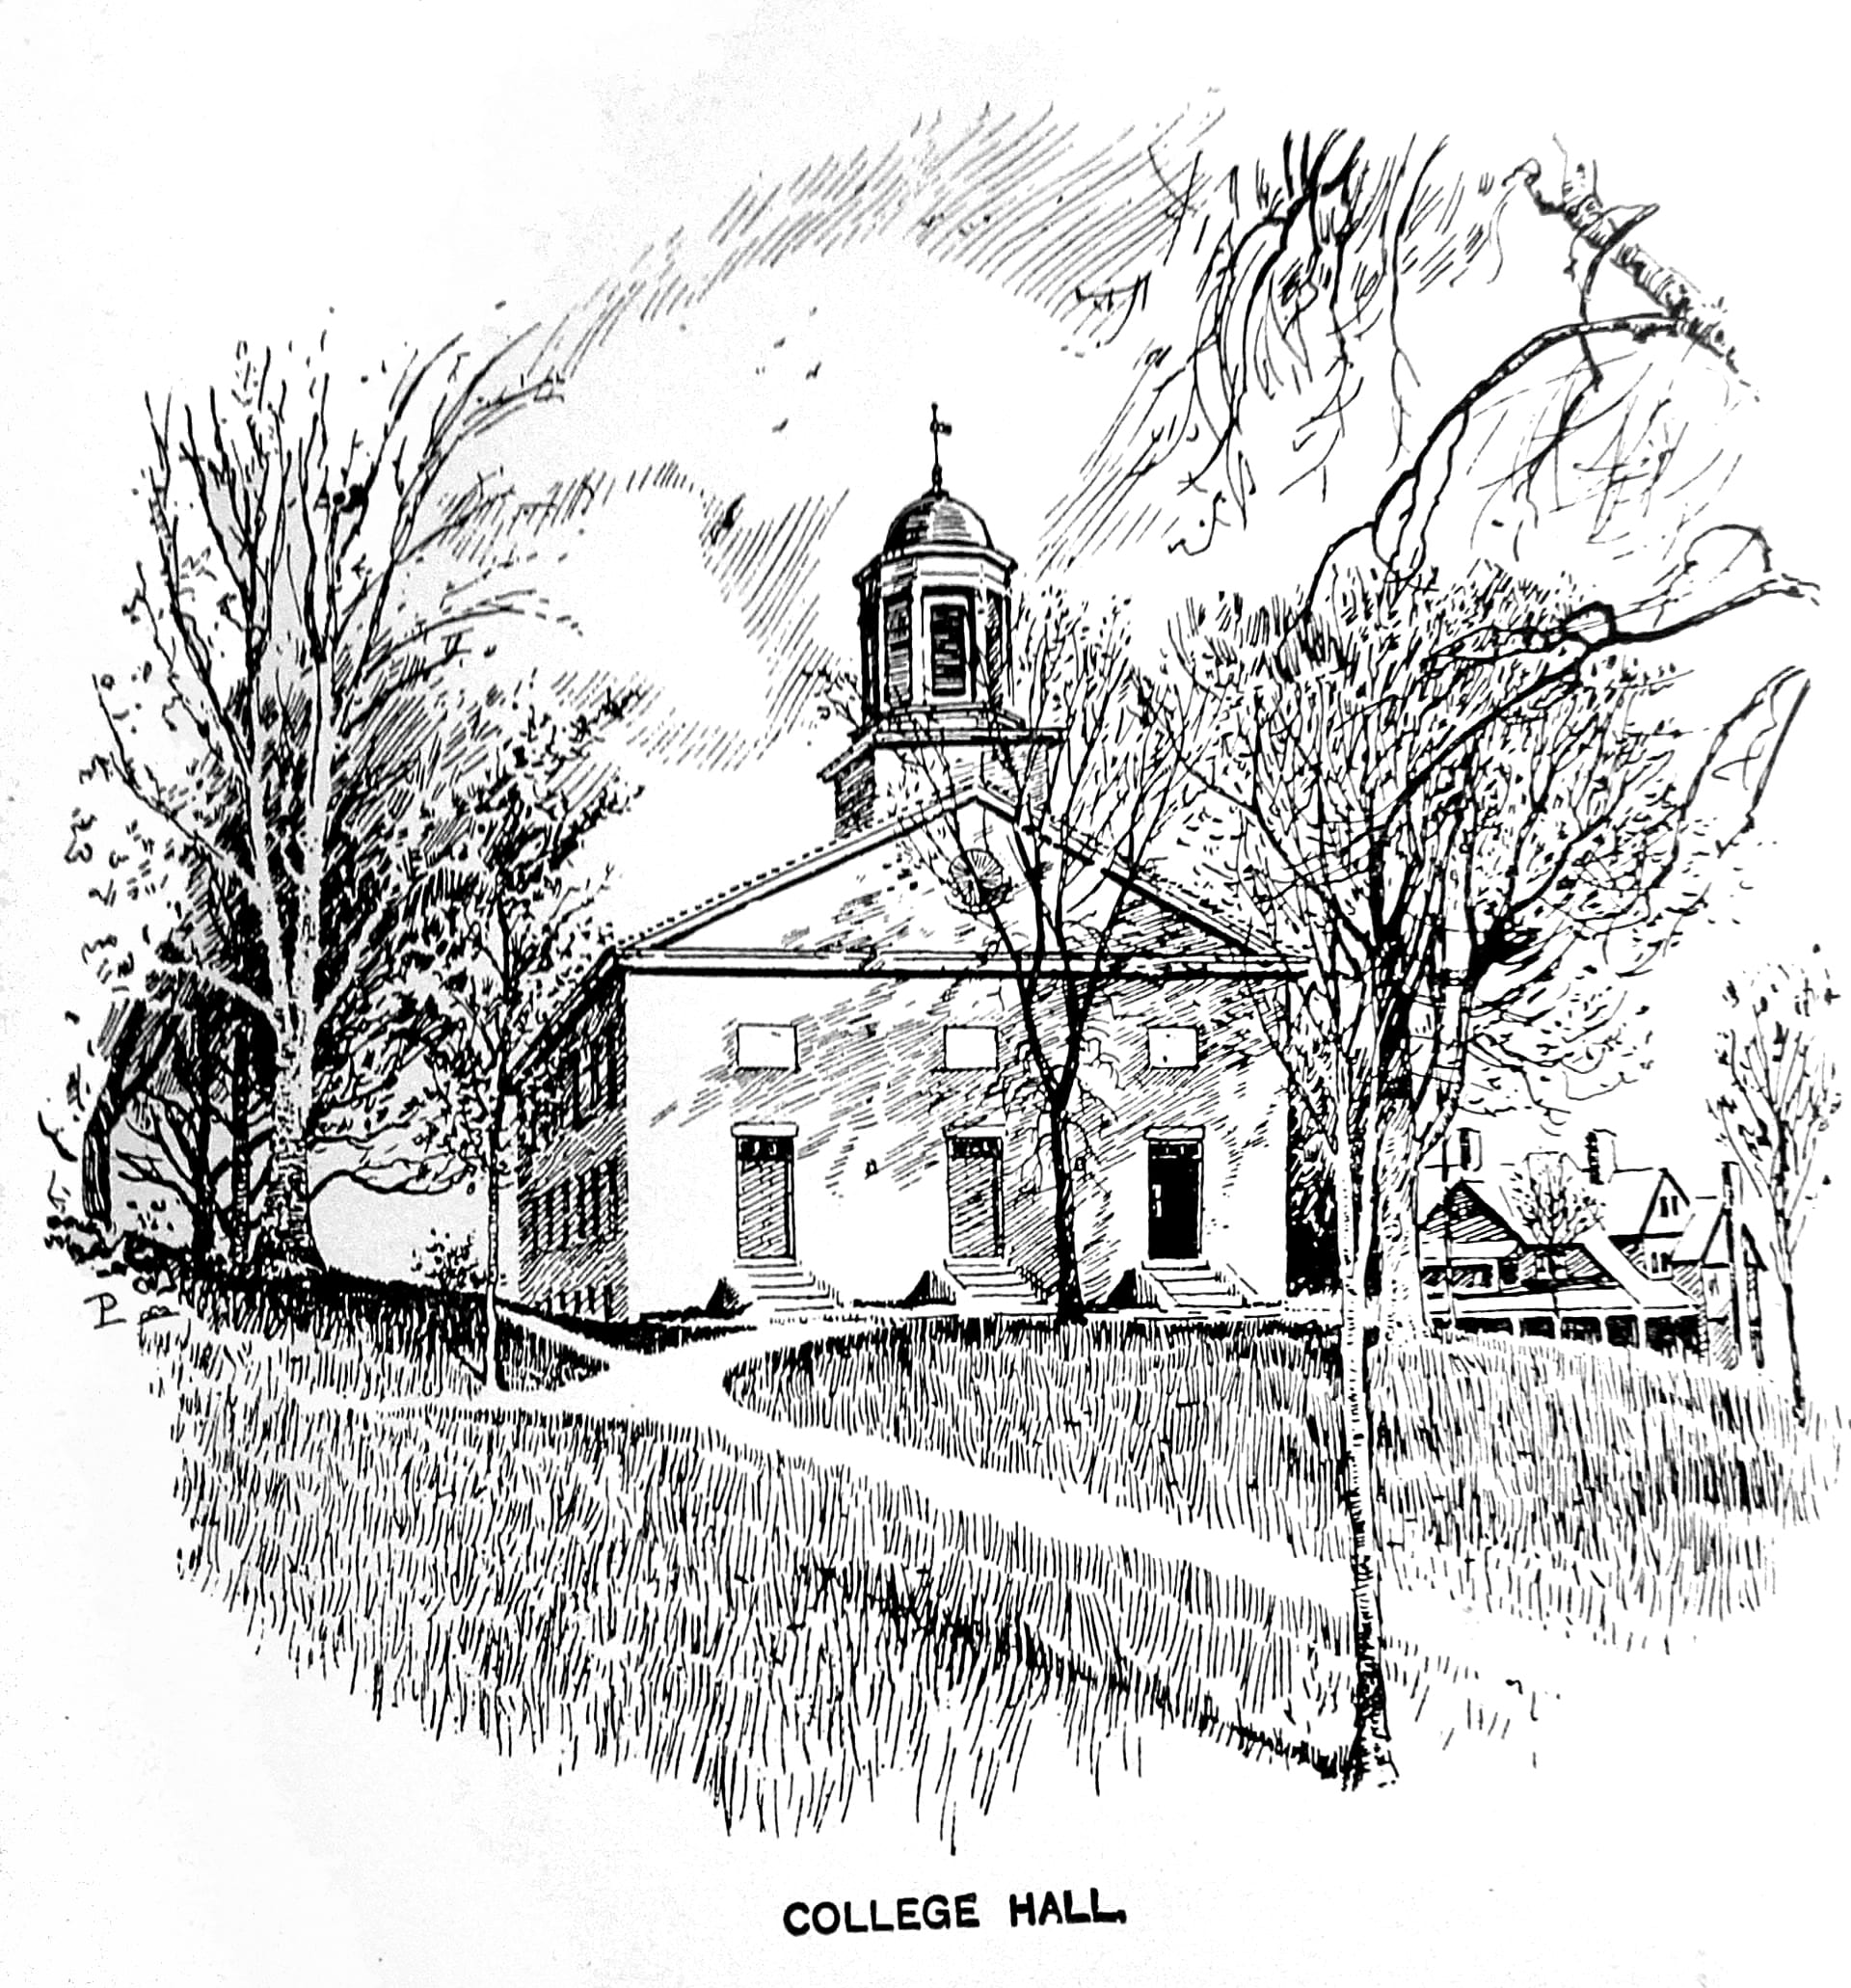 A sketch of College Hall with three front doors, and an octagonal cupola topped by a weather vane. Along the walkway, young trees stand amid the lawn.